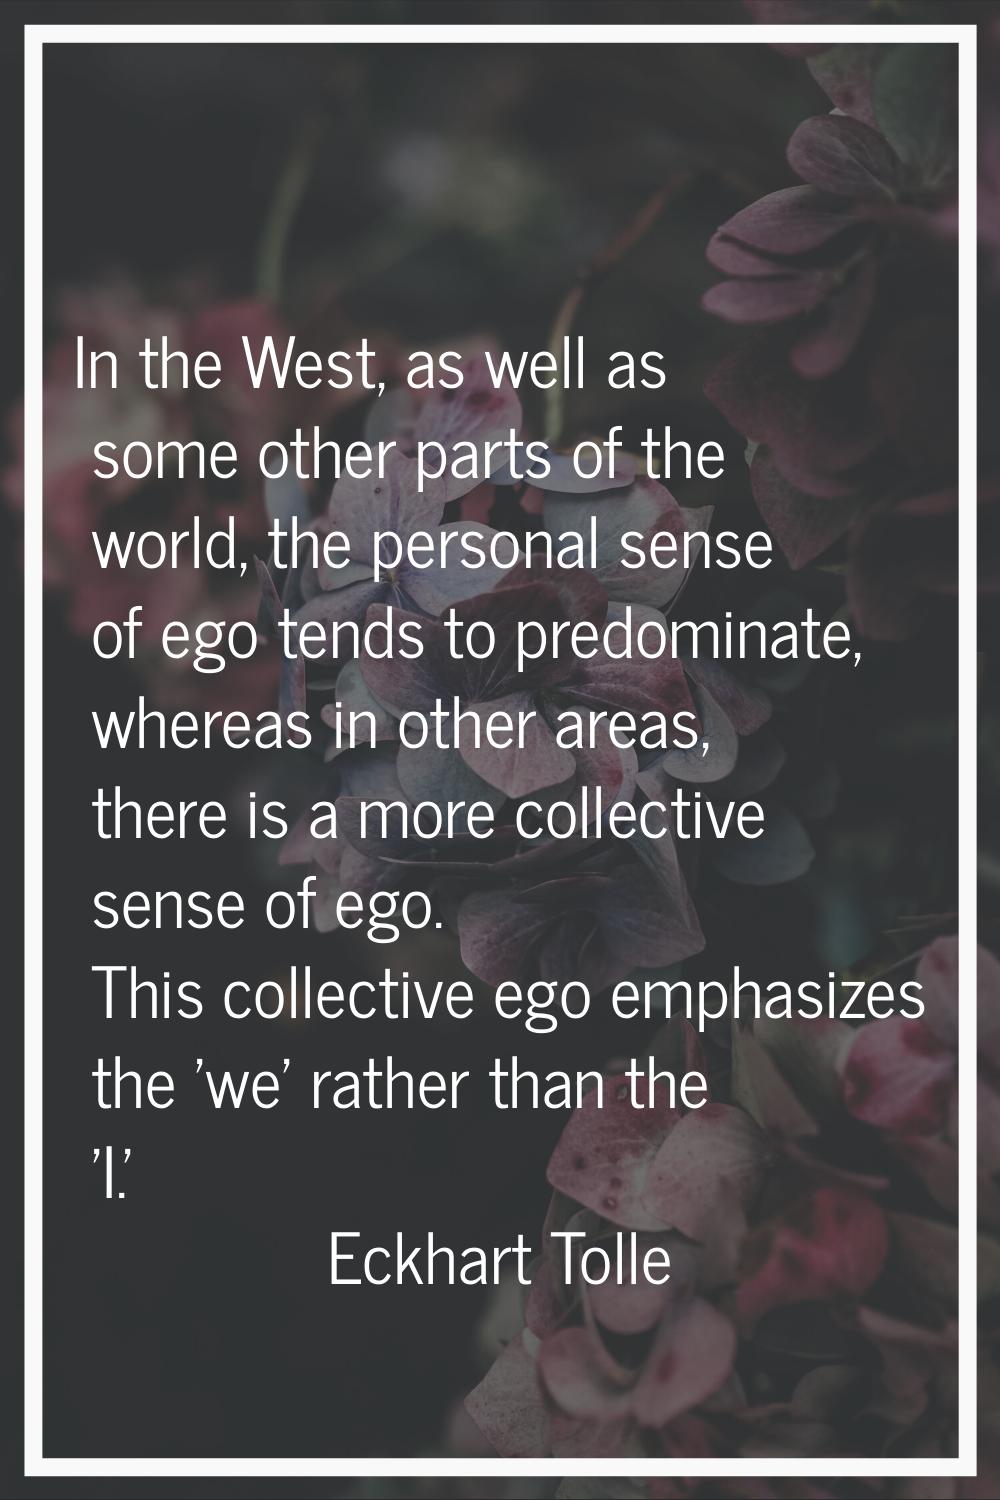 In the West, as well as some other parts of the world, the personal sense of ego tends to predomina